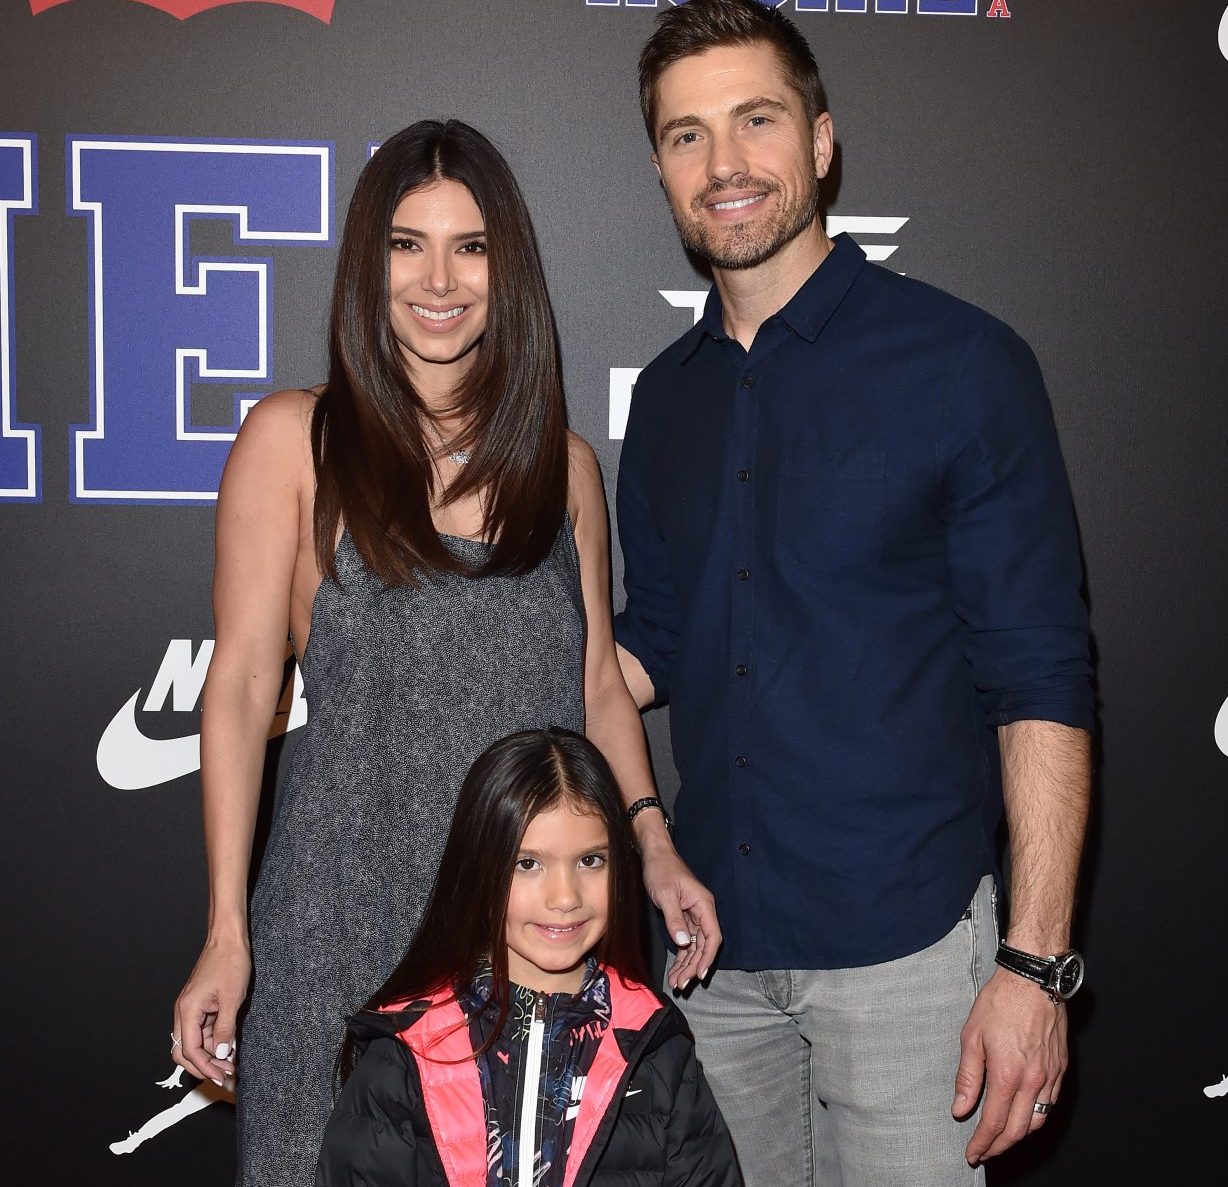 LOS ANGELES, CA - FEBRUARY 15: Actors Roselyn Sanchez, Eric Winter and daughter Sebella Rose Winter attend ROOKIE USA Fashion Show at Milk Studios on February 15, 2018 in Los Angeles, California. (Photo by Axelle/Bauer-Griffin/FilmMagic)